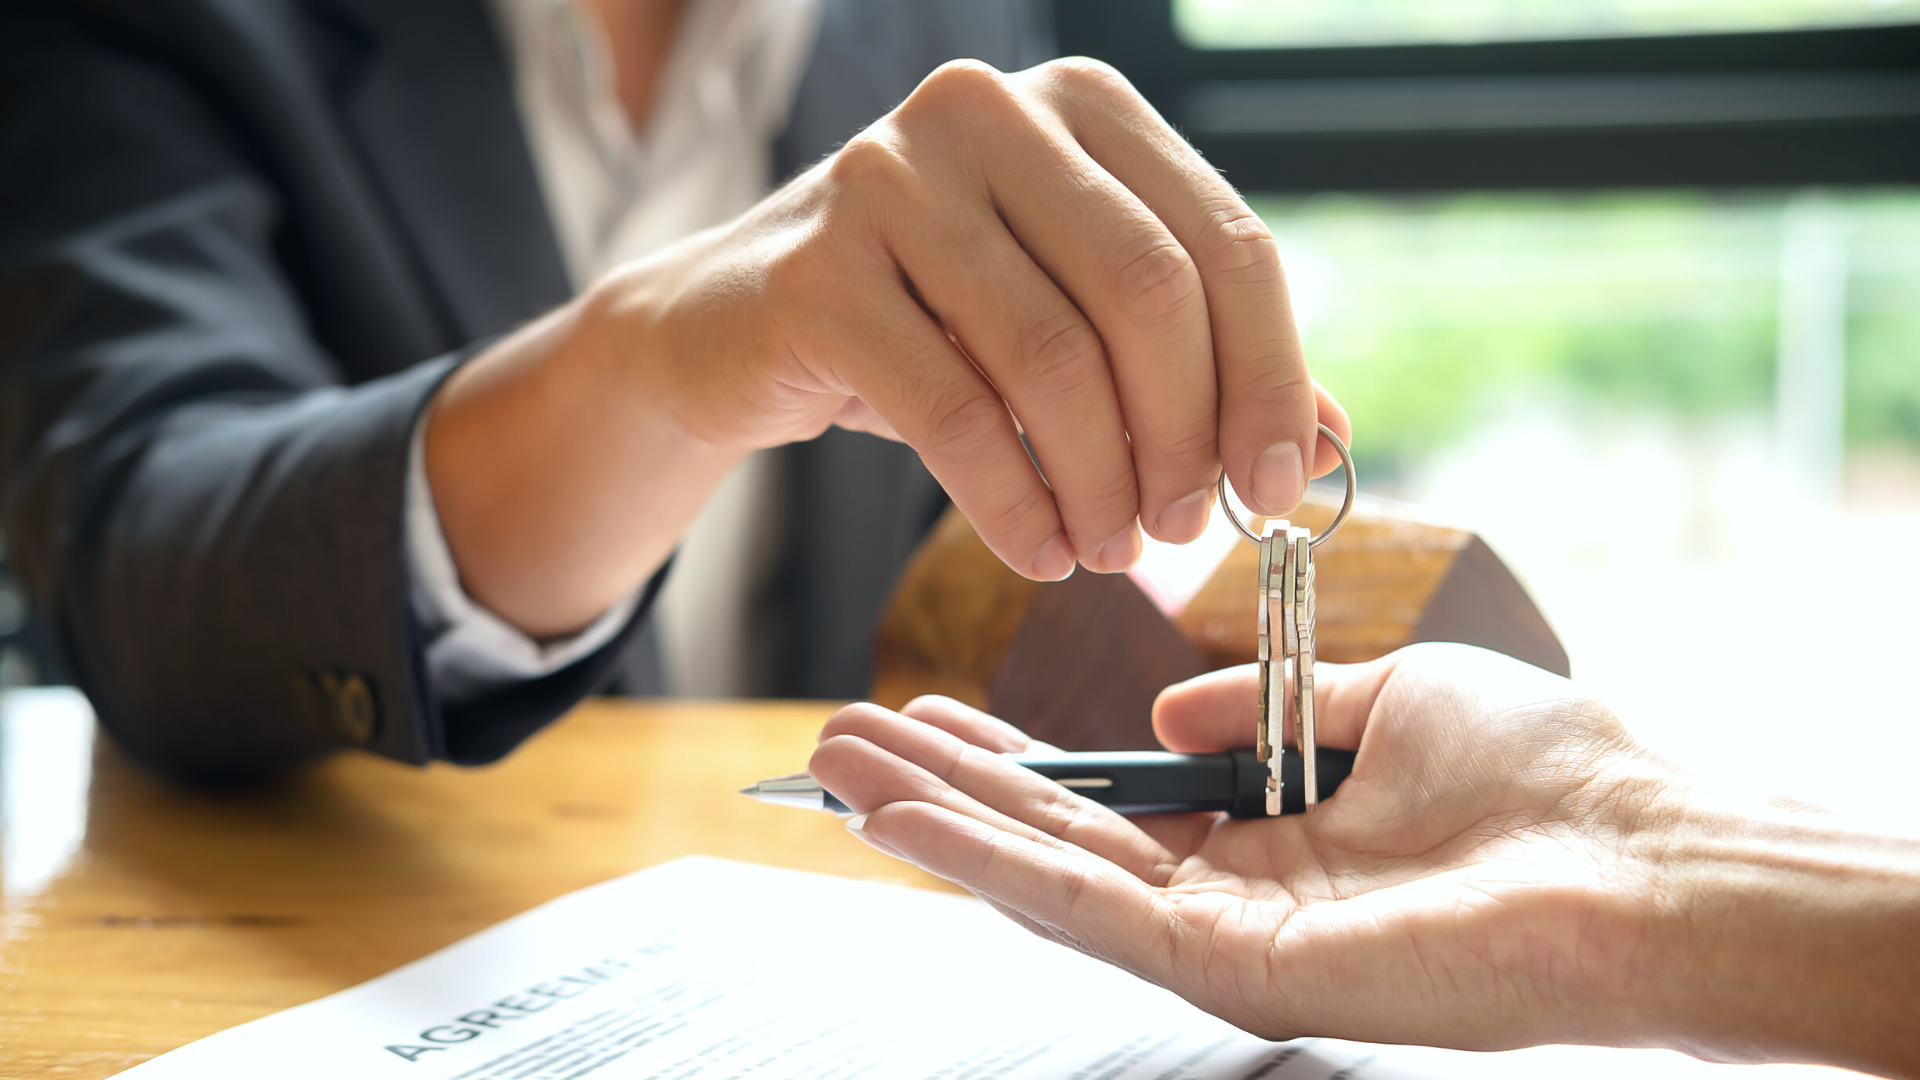 Real Estate Agent Hands Home Buyer The Keys To Their New Home